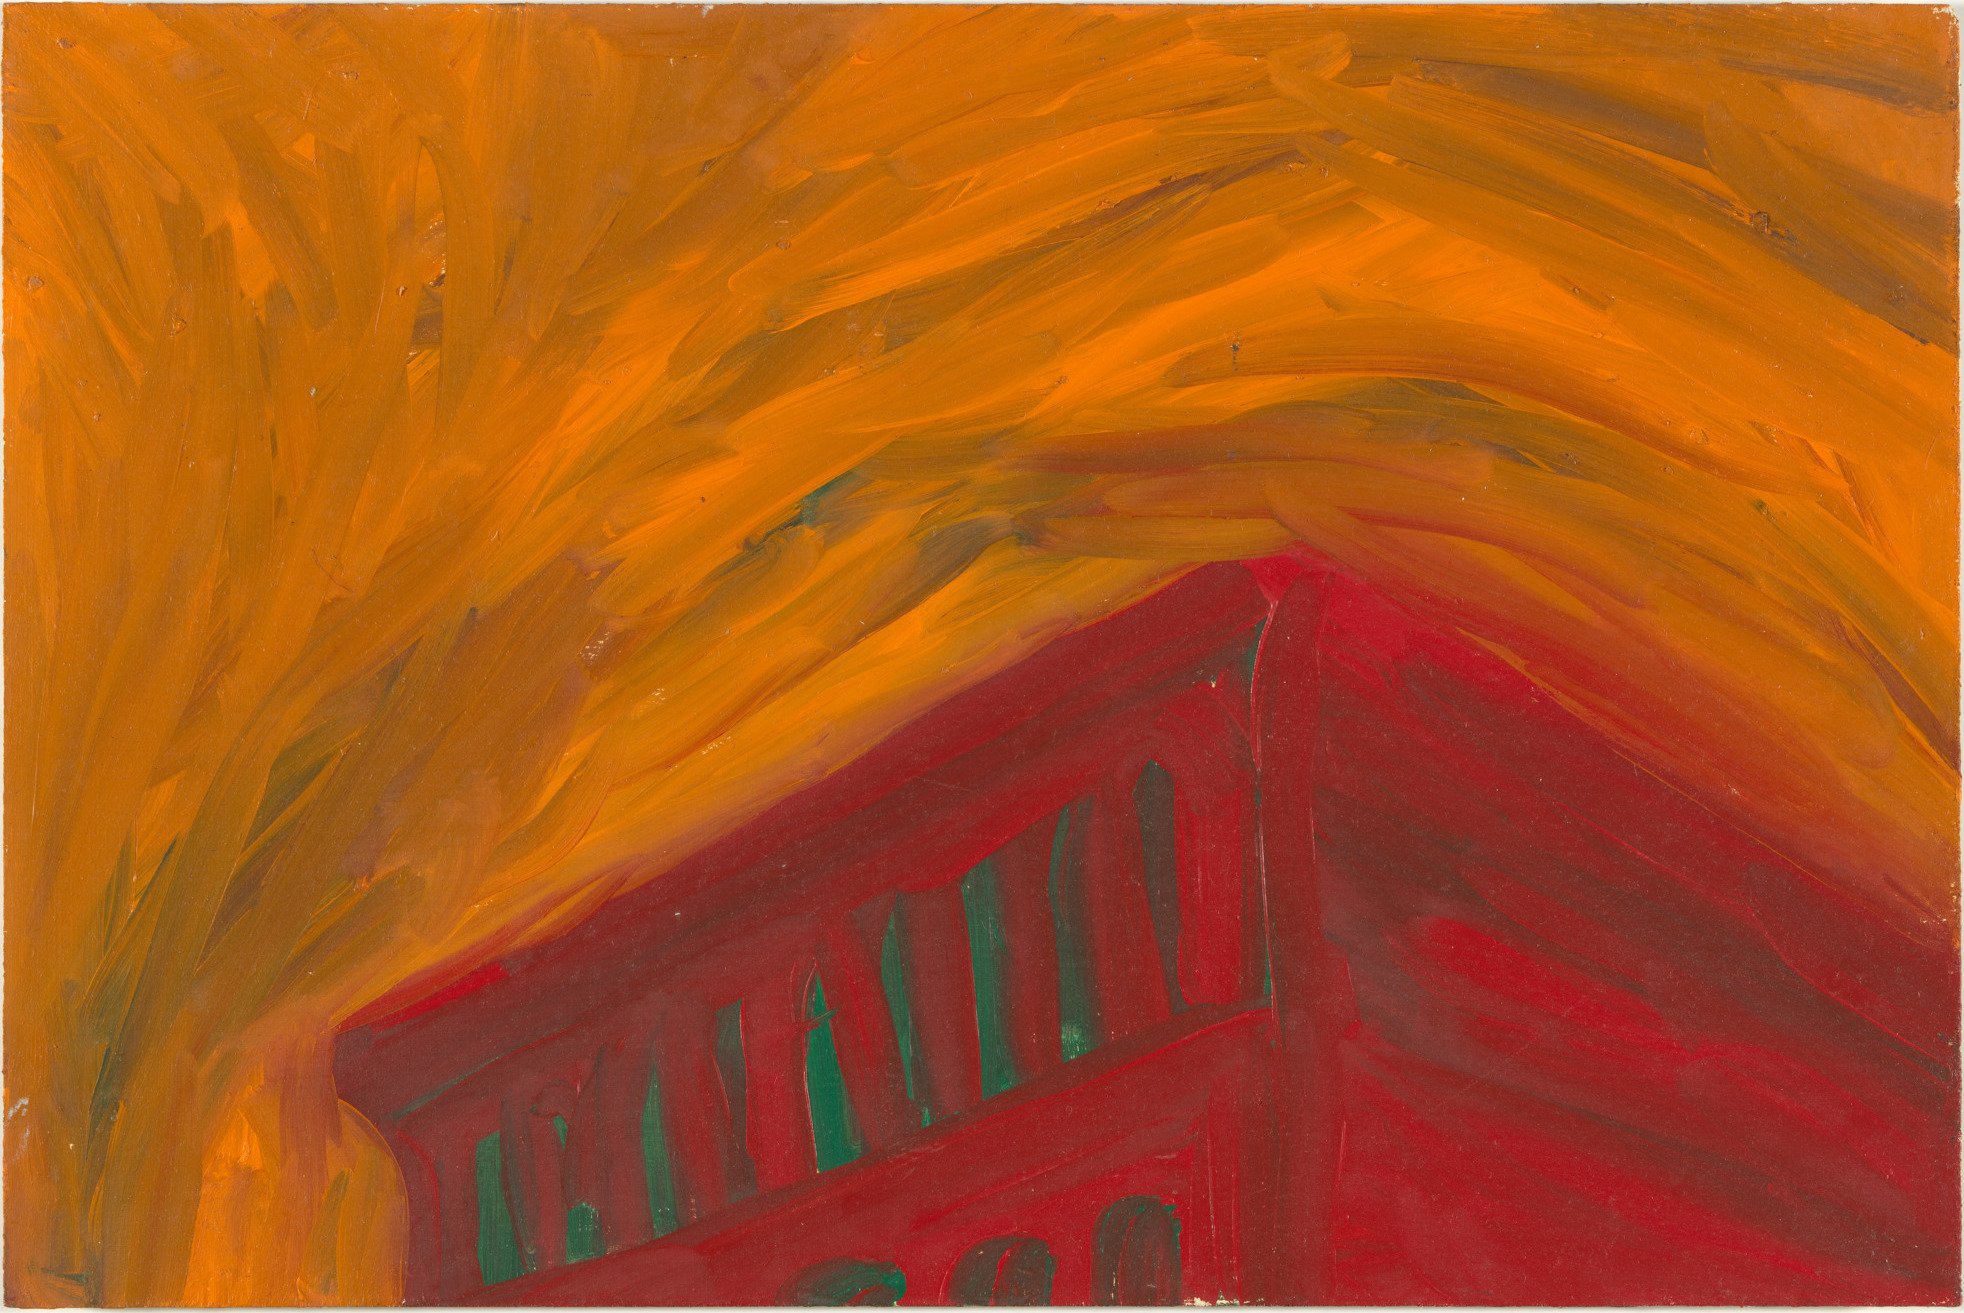   Untitled , 1980. Oil on panel. 12 x 18 in. Collection  National Gallery of Australia , Canberra 